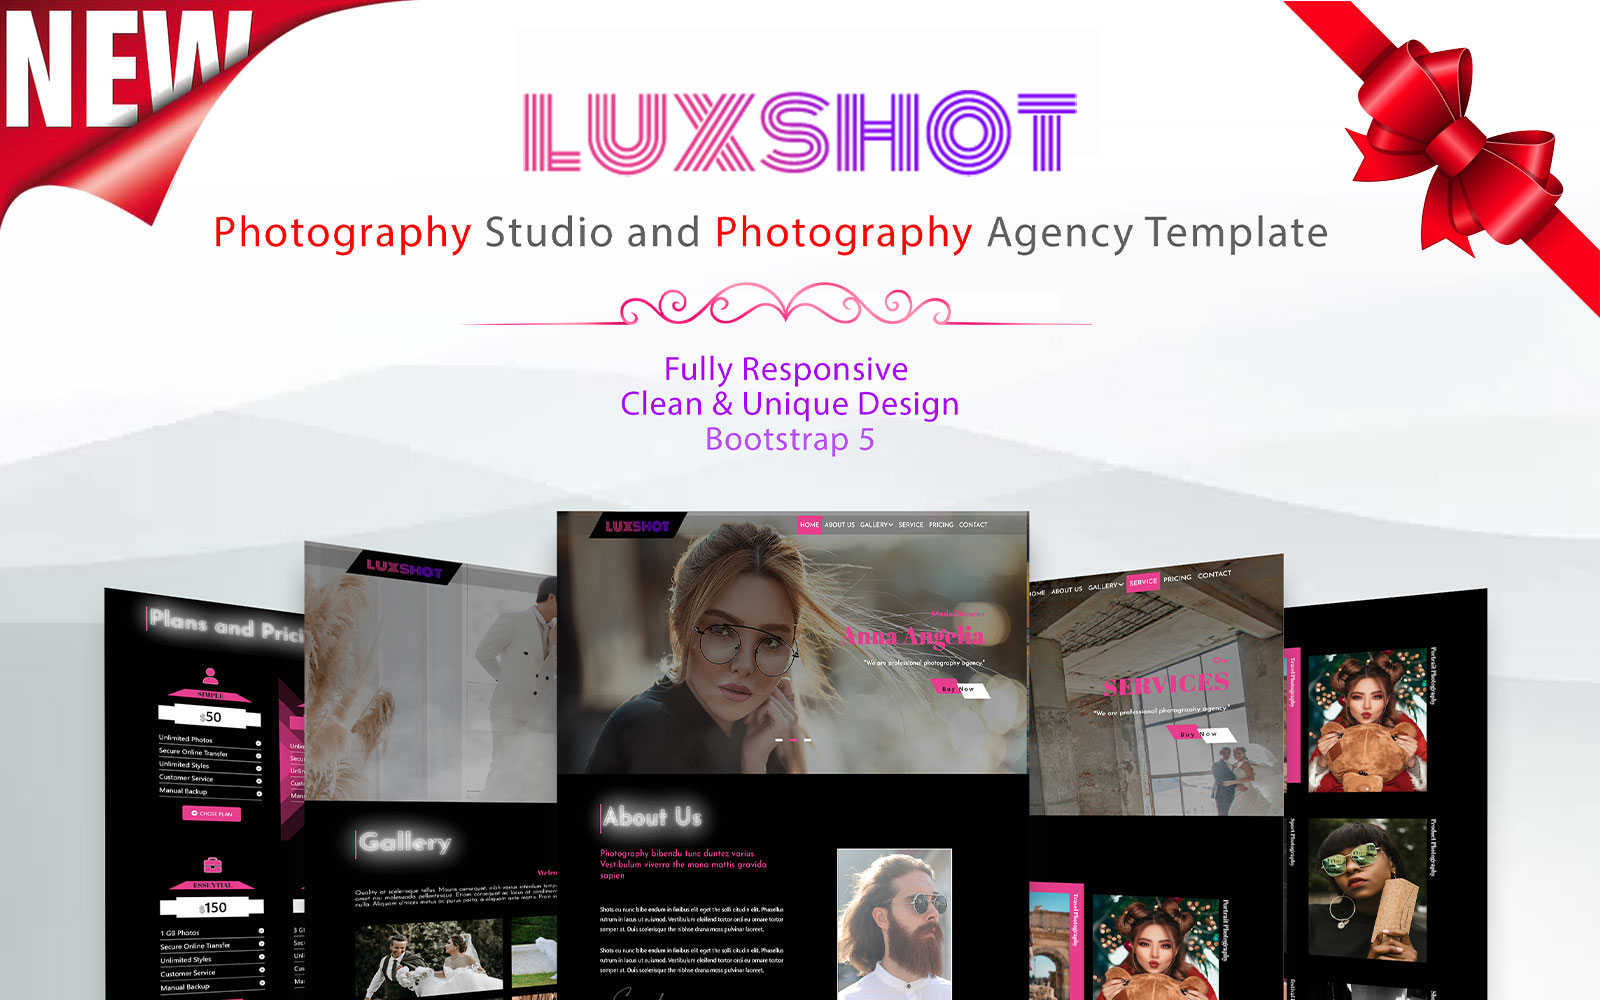 Luxshot - Photography Studio and Photography Agency Template